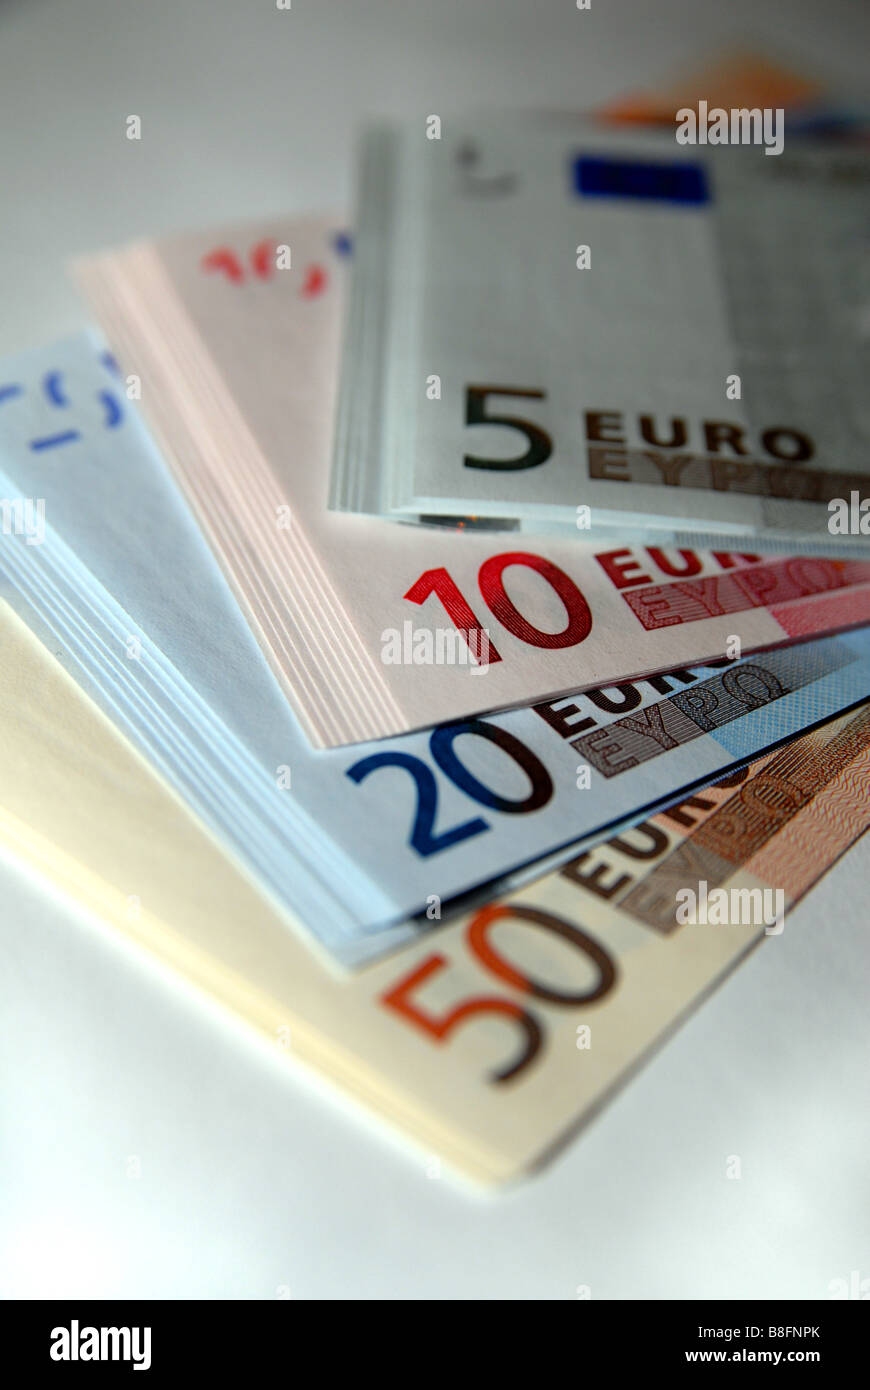 A stack of Euro bank notes / currency / money / cash Stock Photo